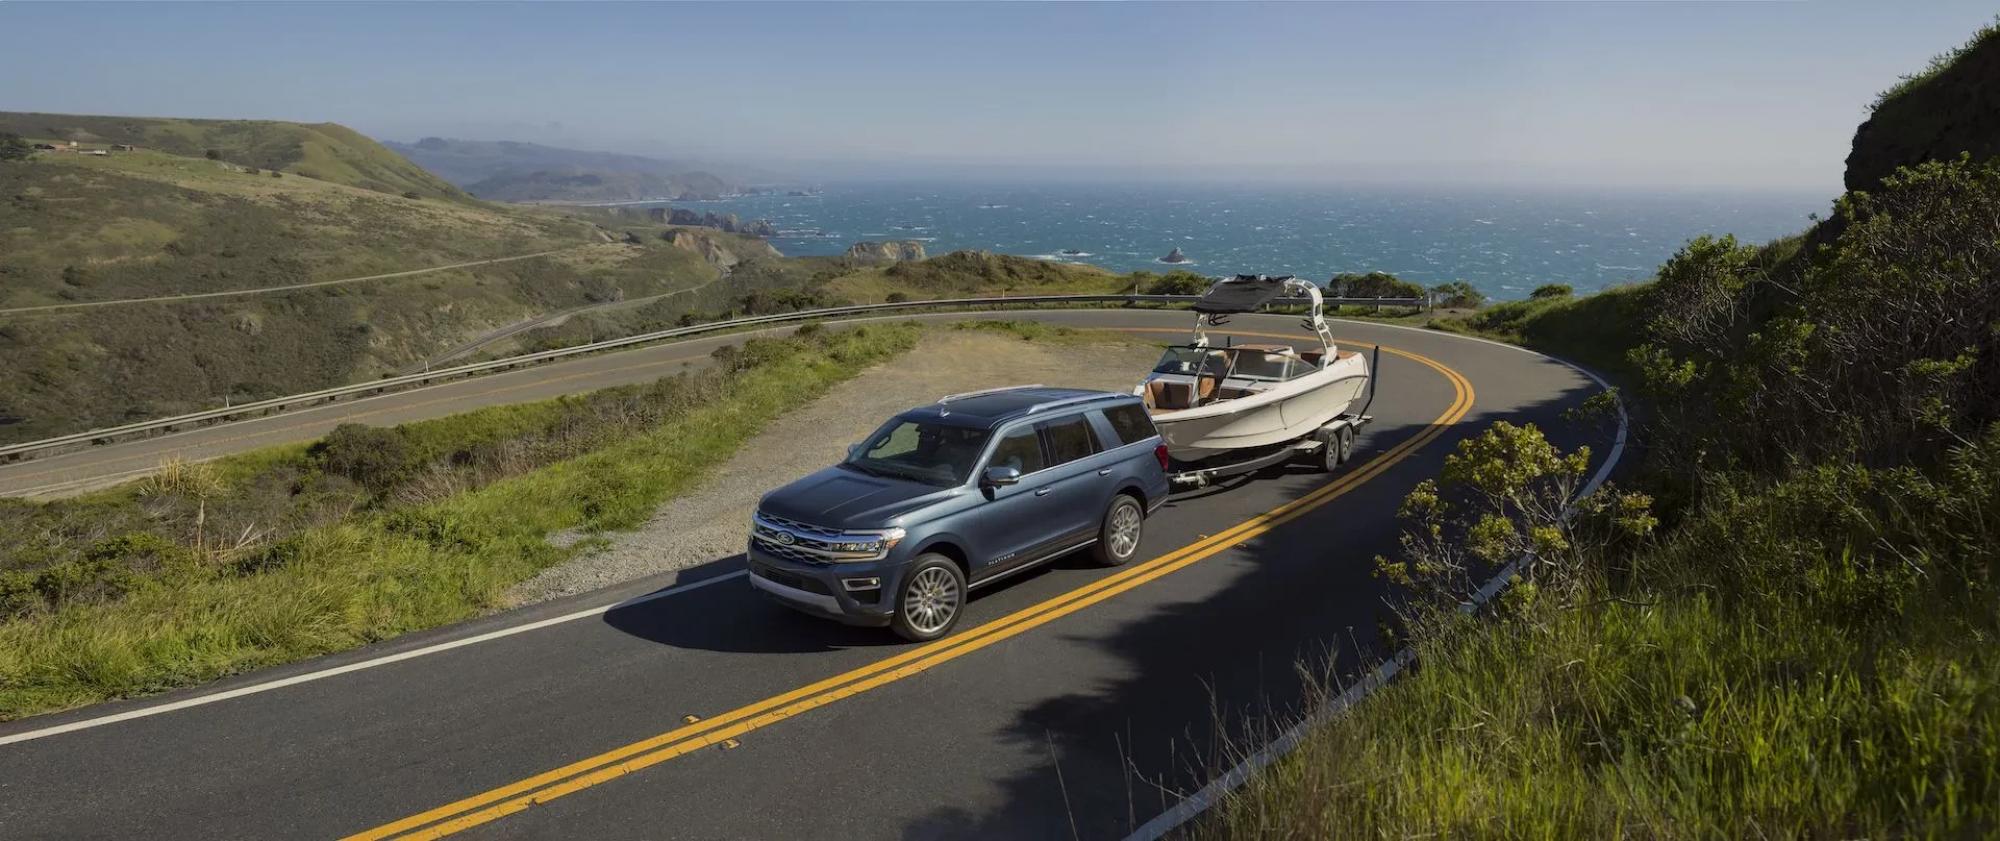 Grey Ford SUV towing a boat driving up a road overlooking the ocean